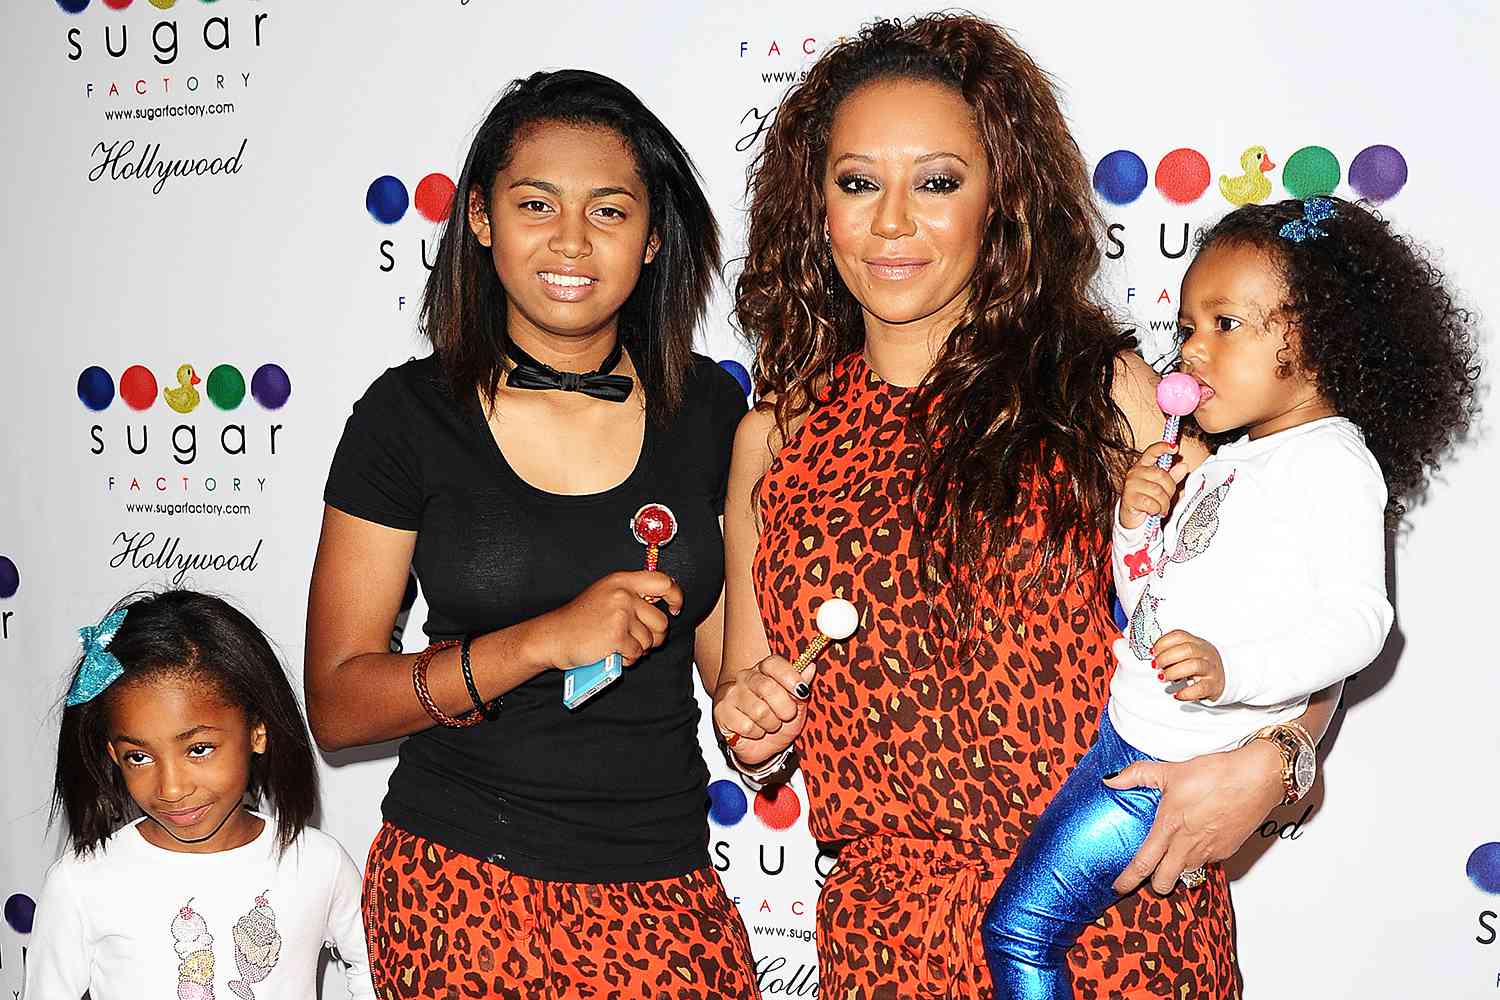 Mel B's 3 Daughters: All About Phoenix, Angel and Madison